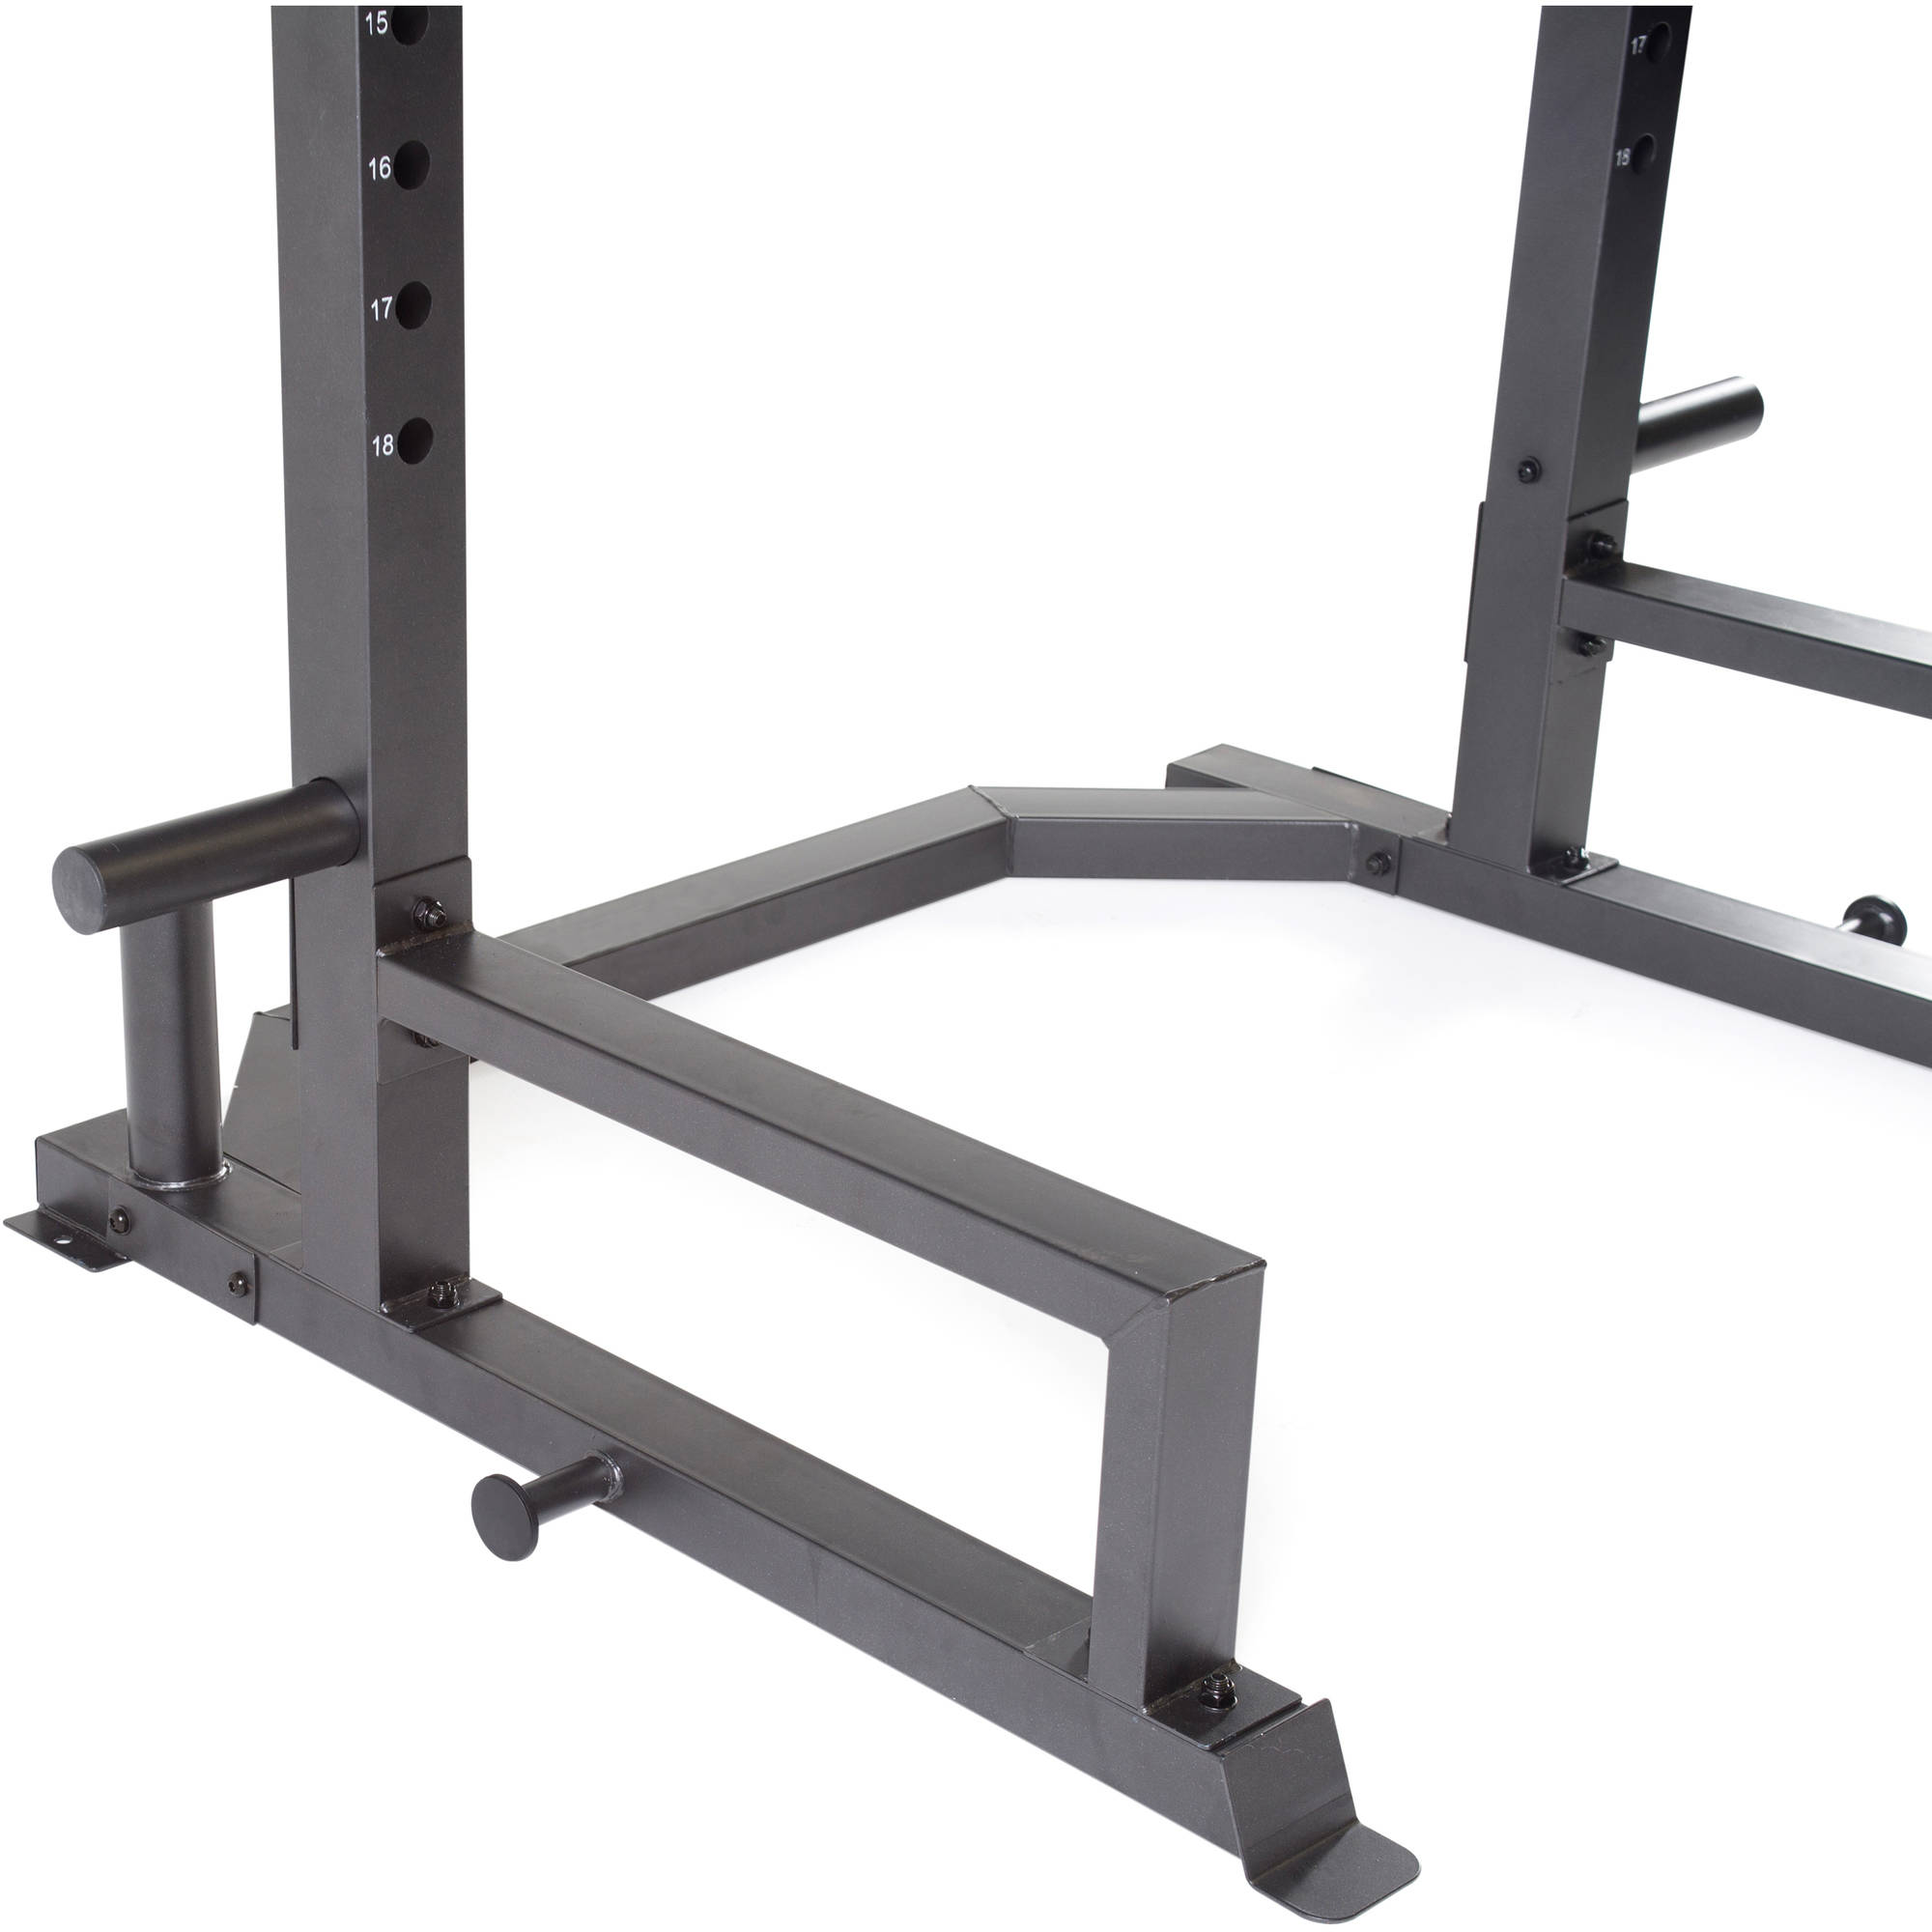 Fuel Pureformance Deluxe Weight Lifting Power Cage - image 4 of 9